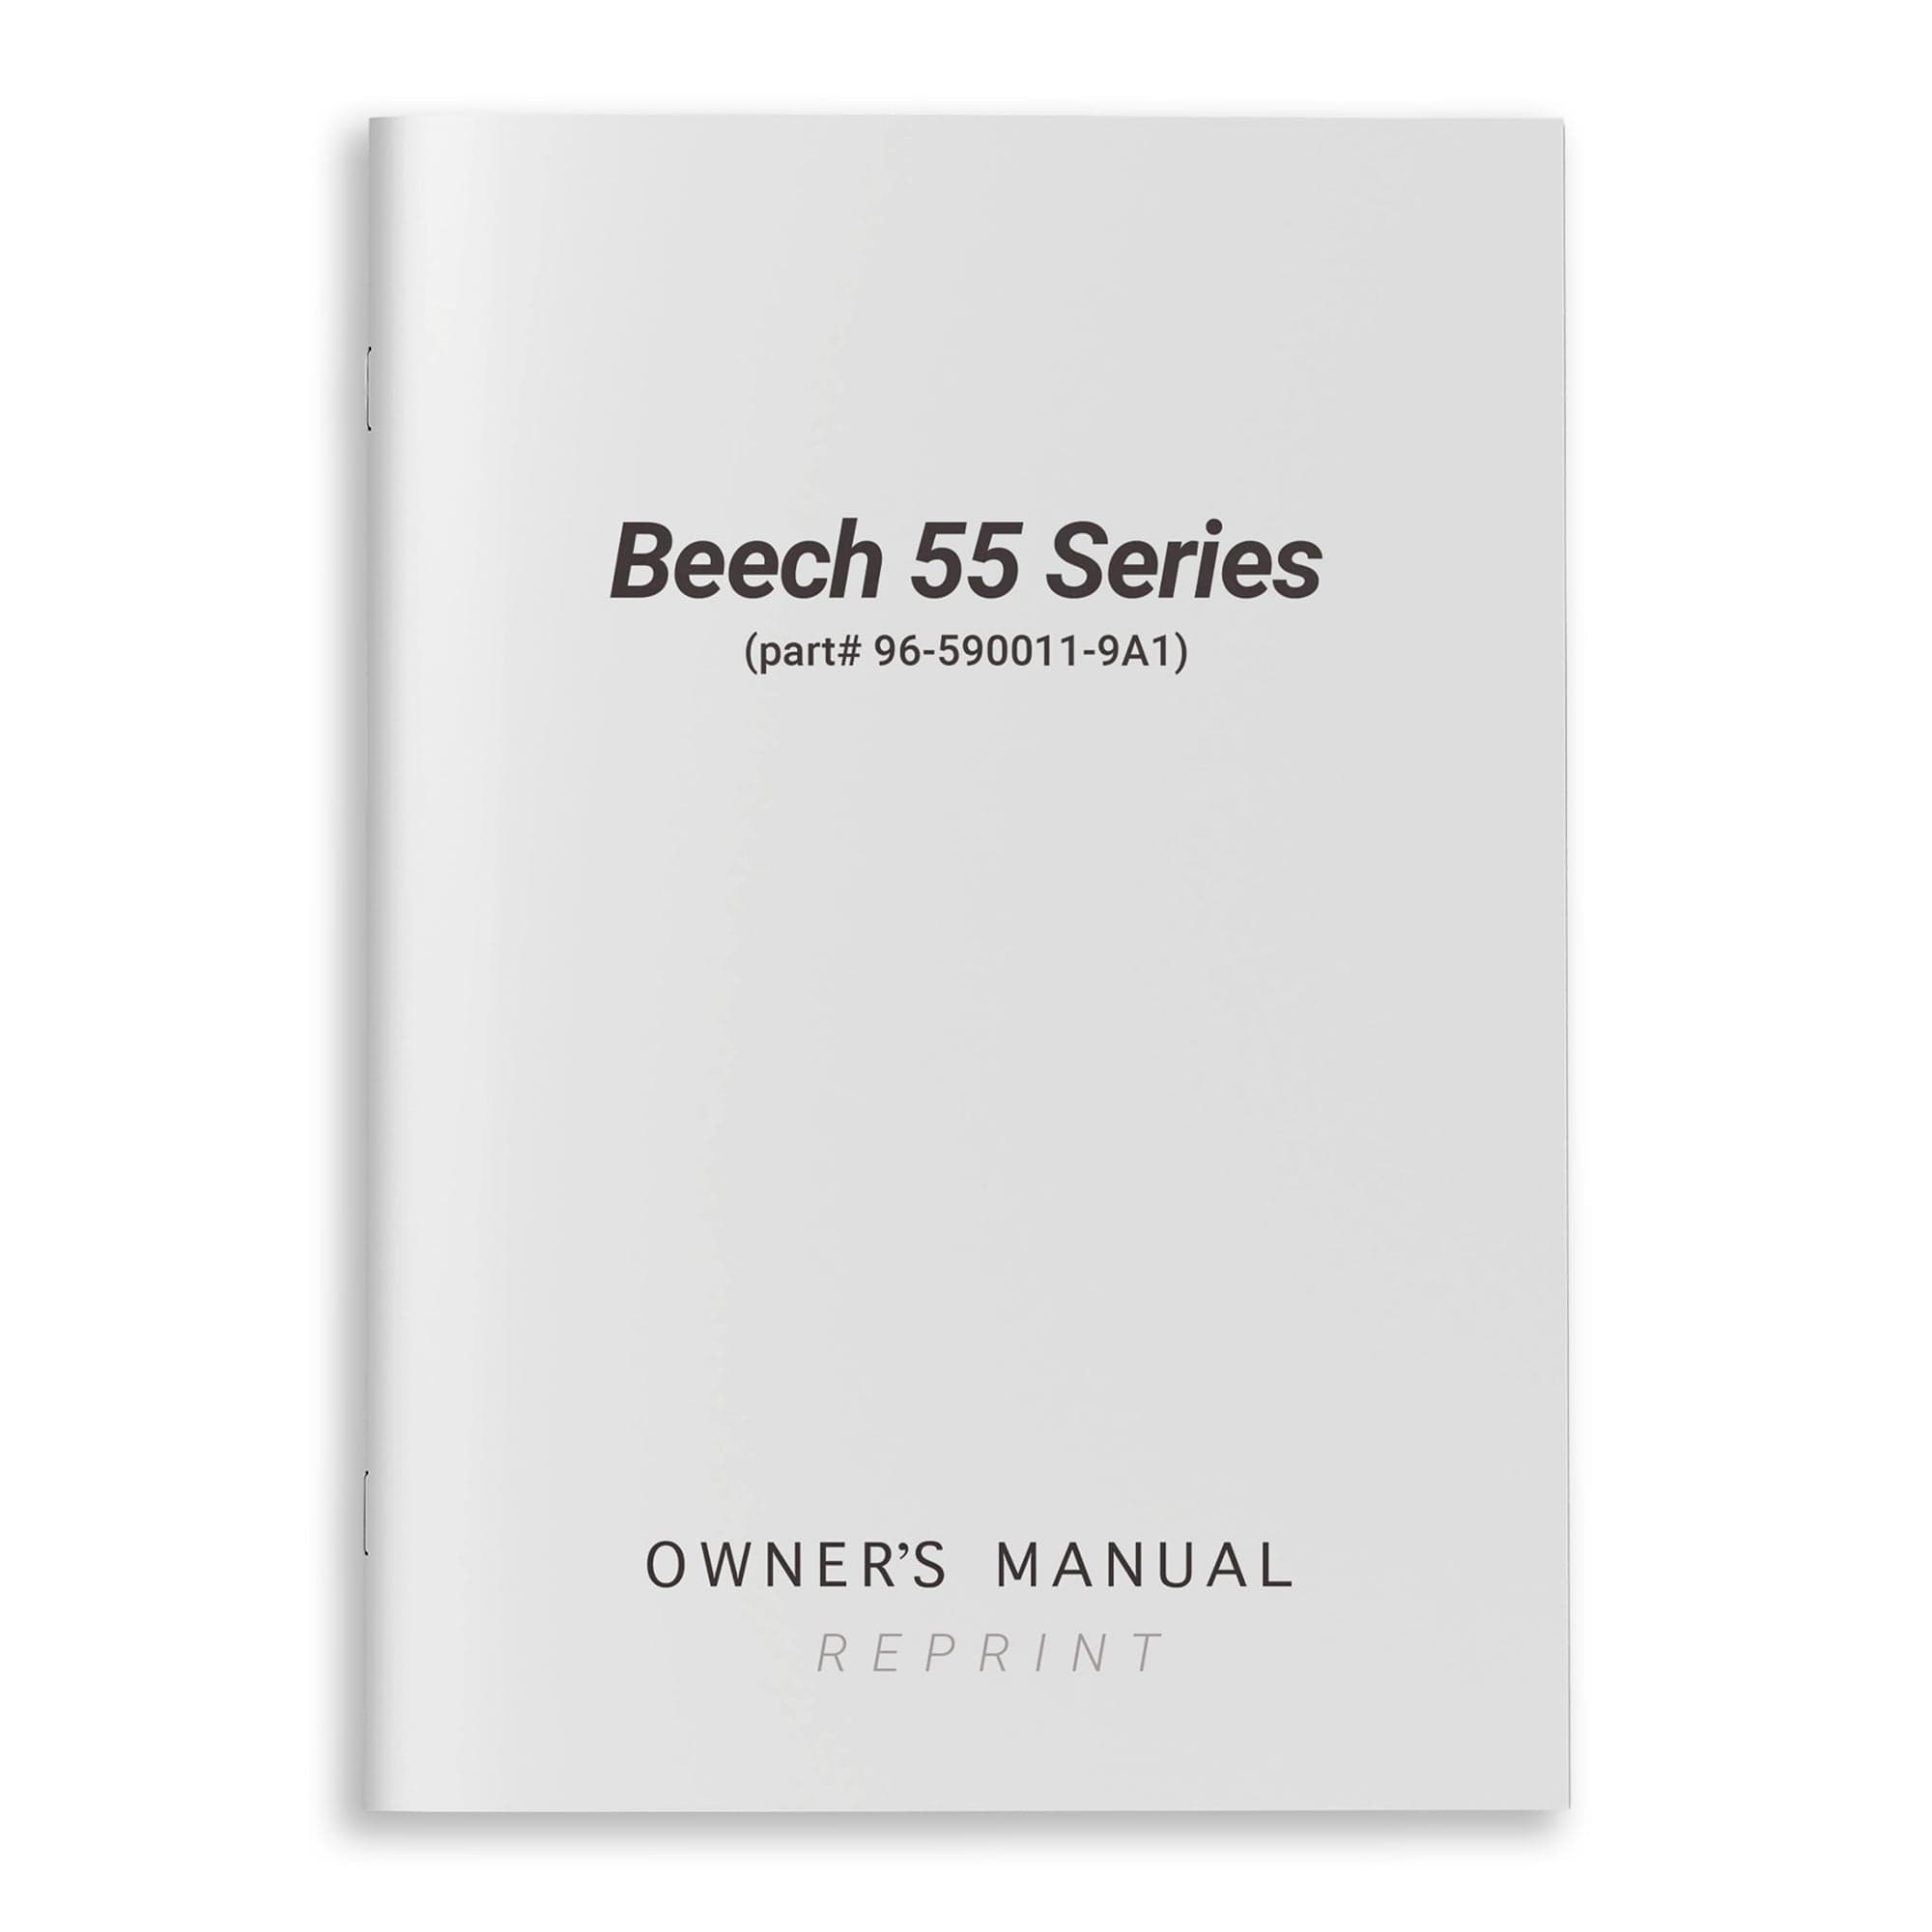 Beech 55 Series Owner's Manual (part# 96-590011-9A1)